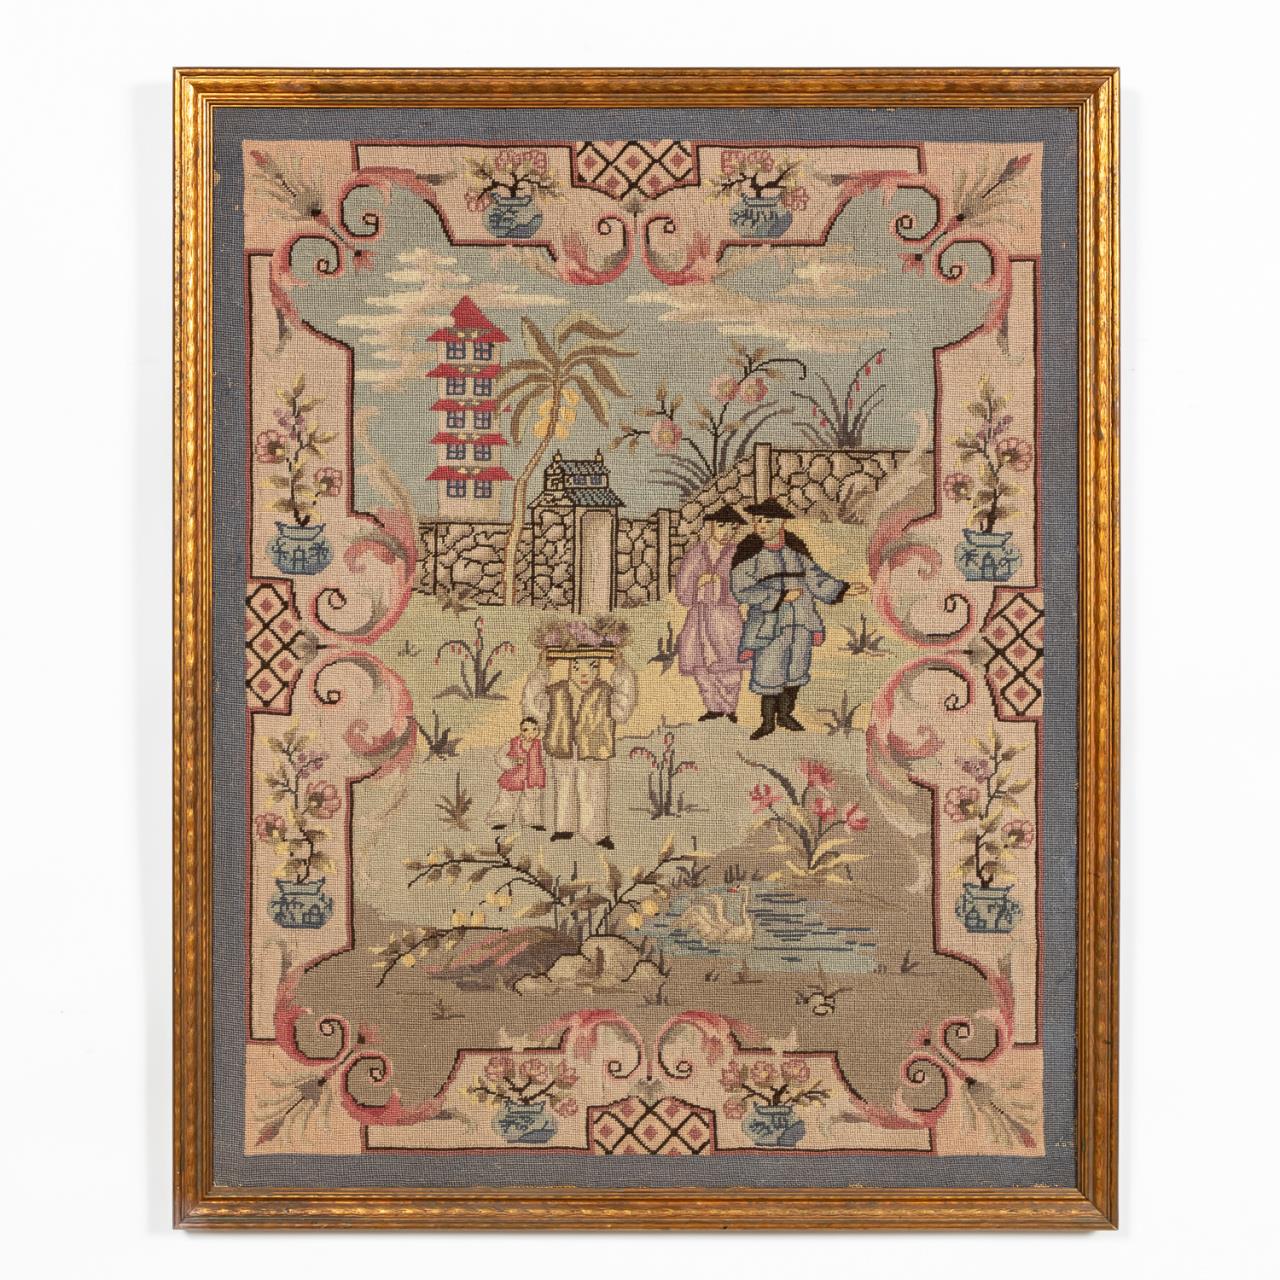 20TH CENTURY CHINOISERIE EMBROIDERY,